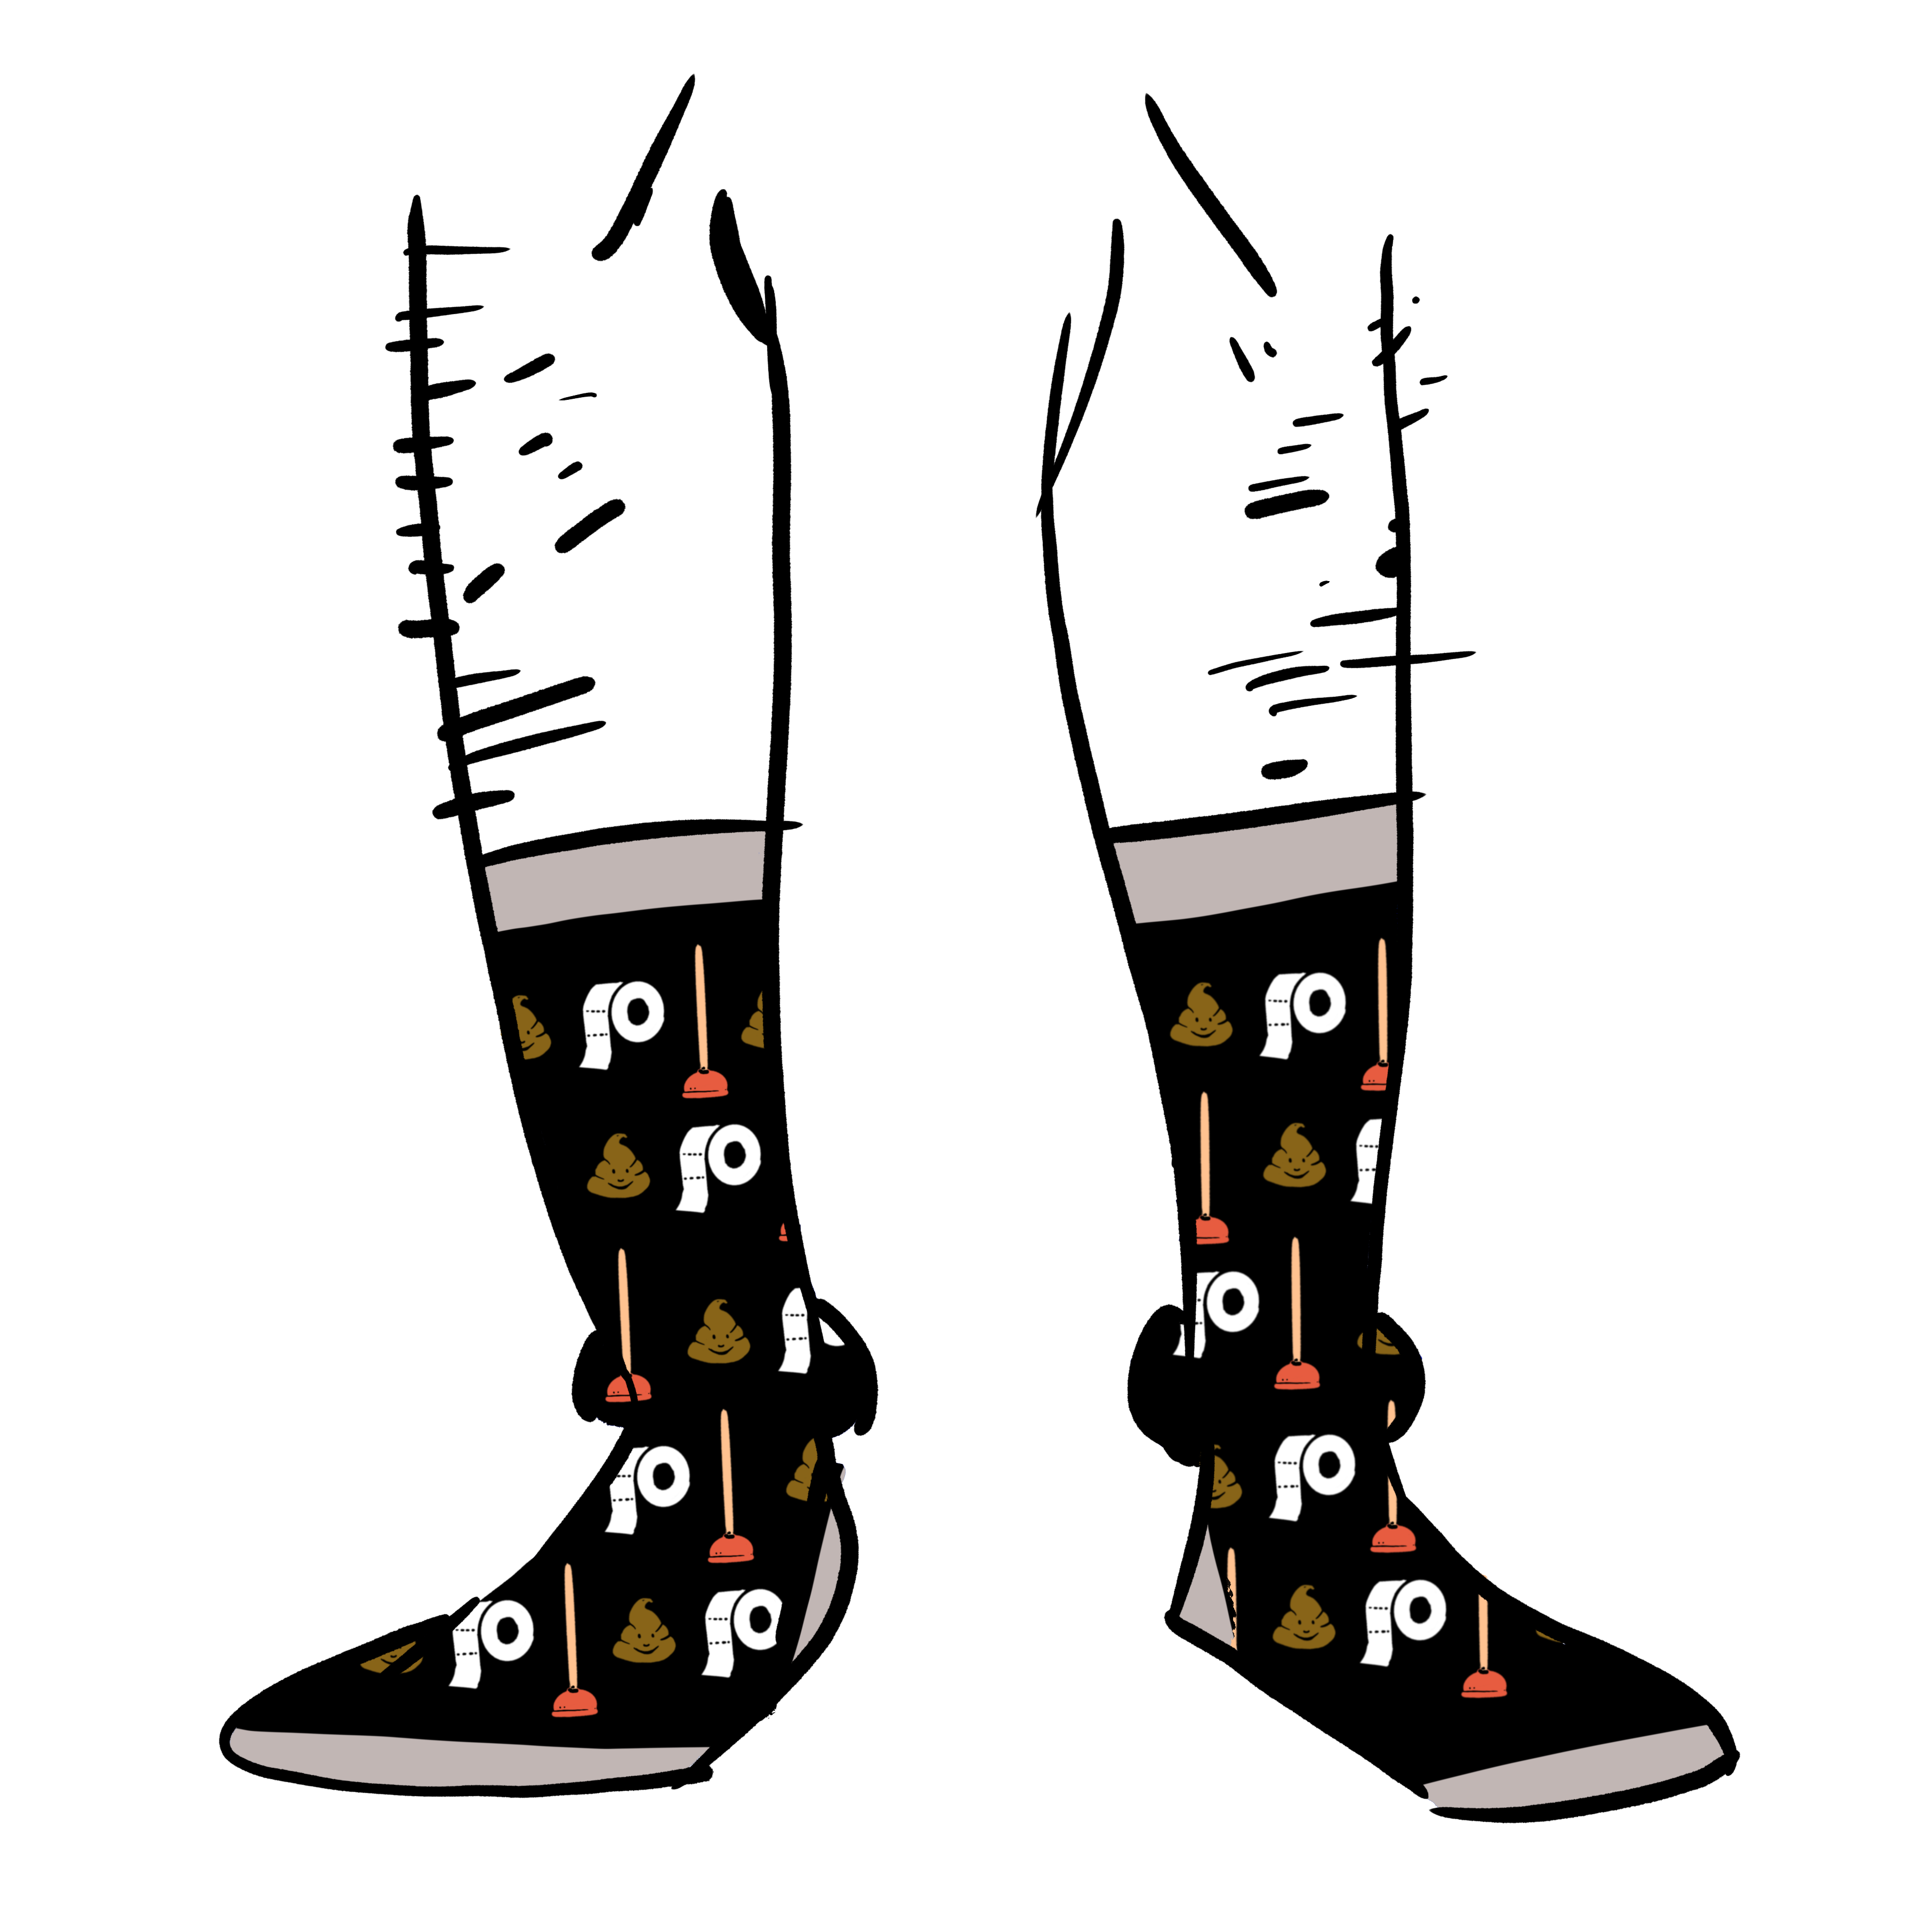 Black socks with a pattern made up of a plunger, toilet paper, and the poop emoji on them.